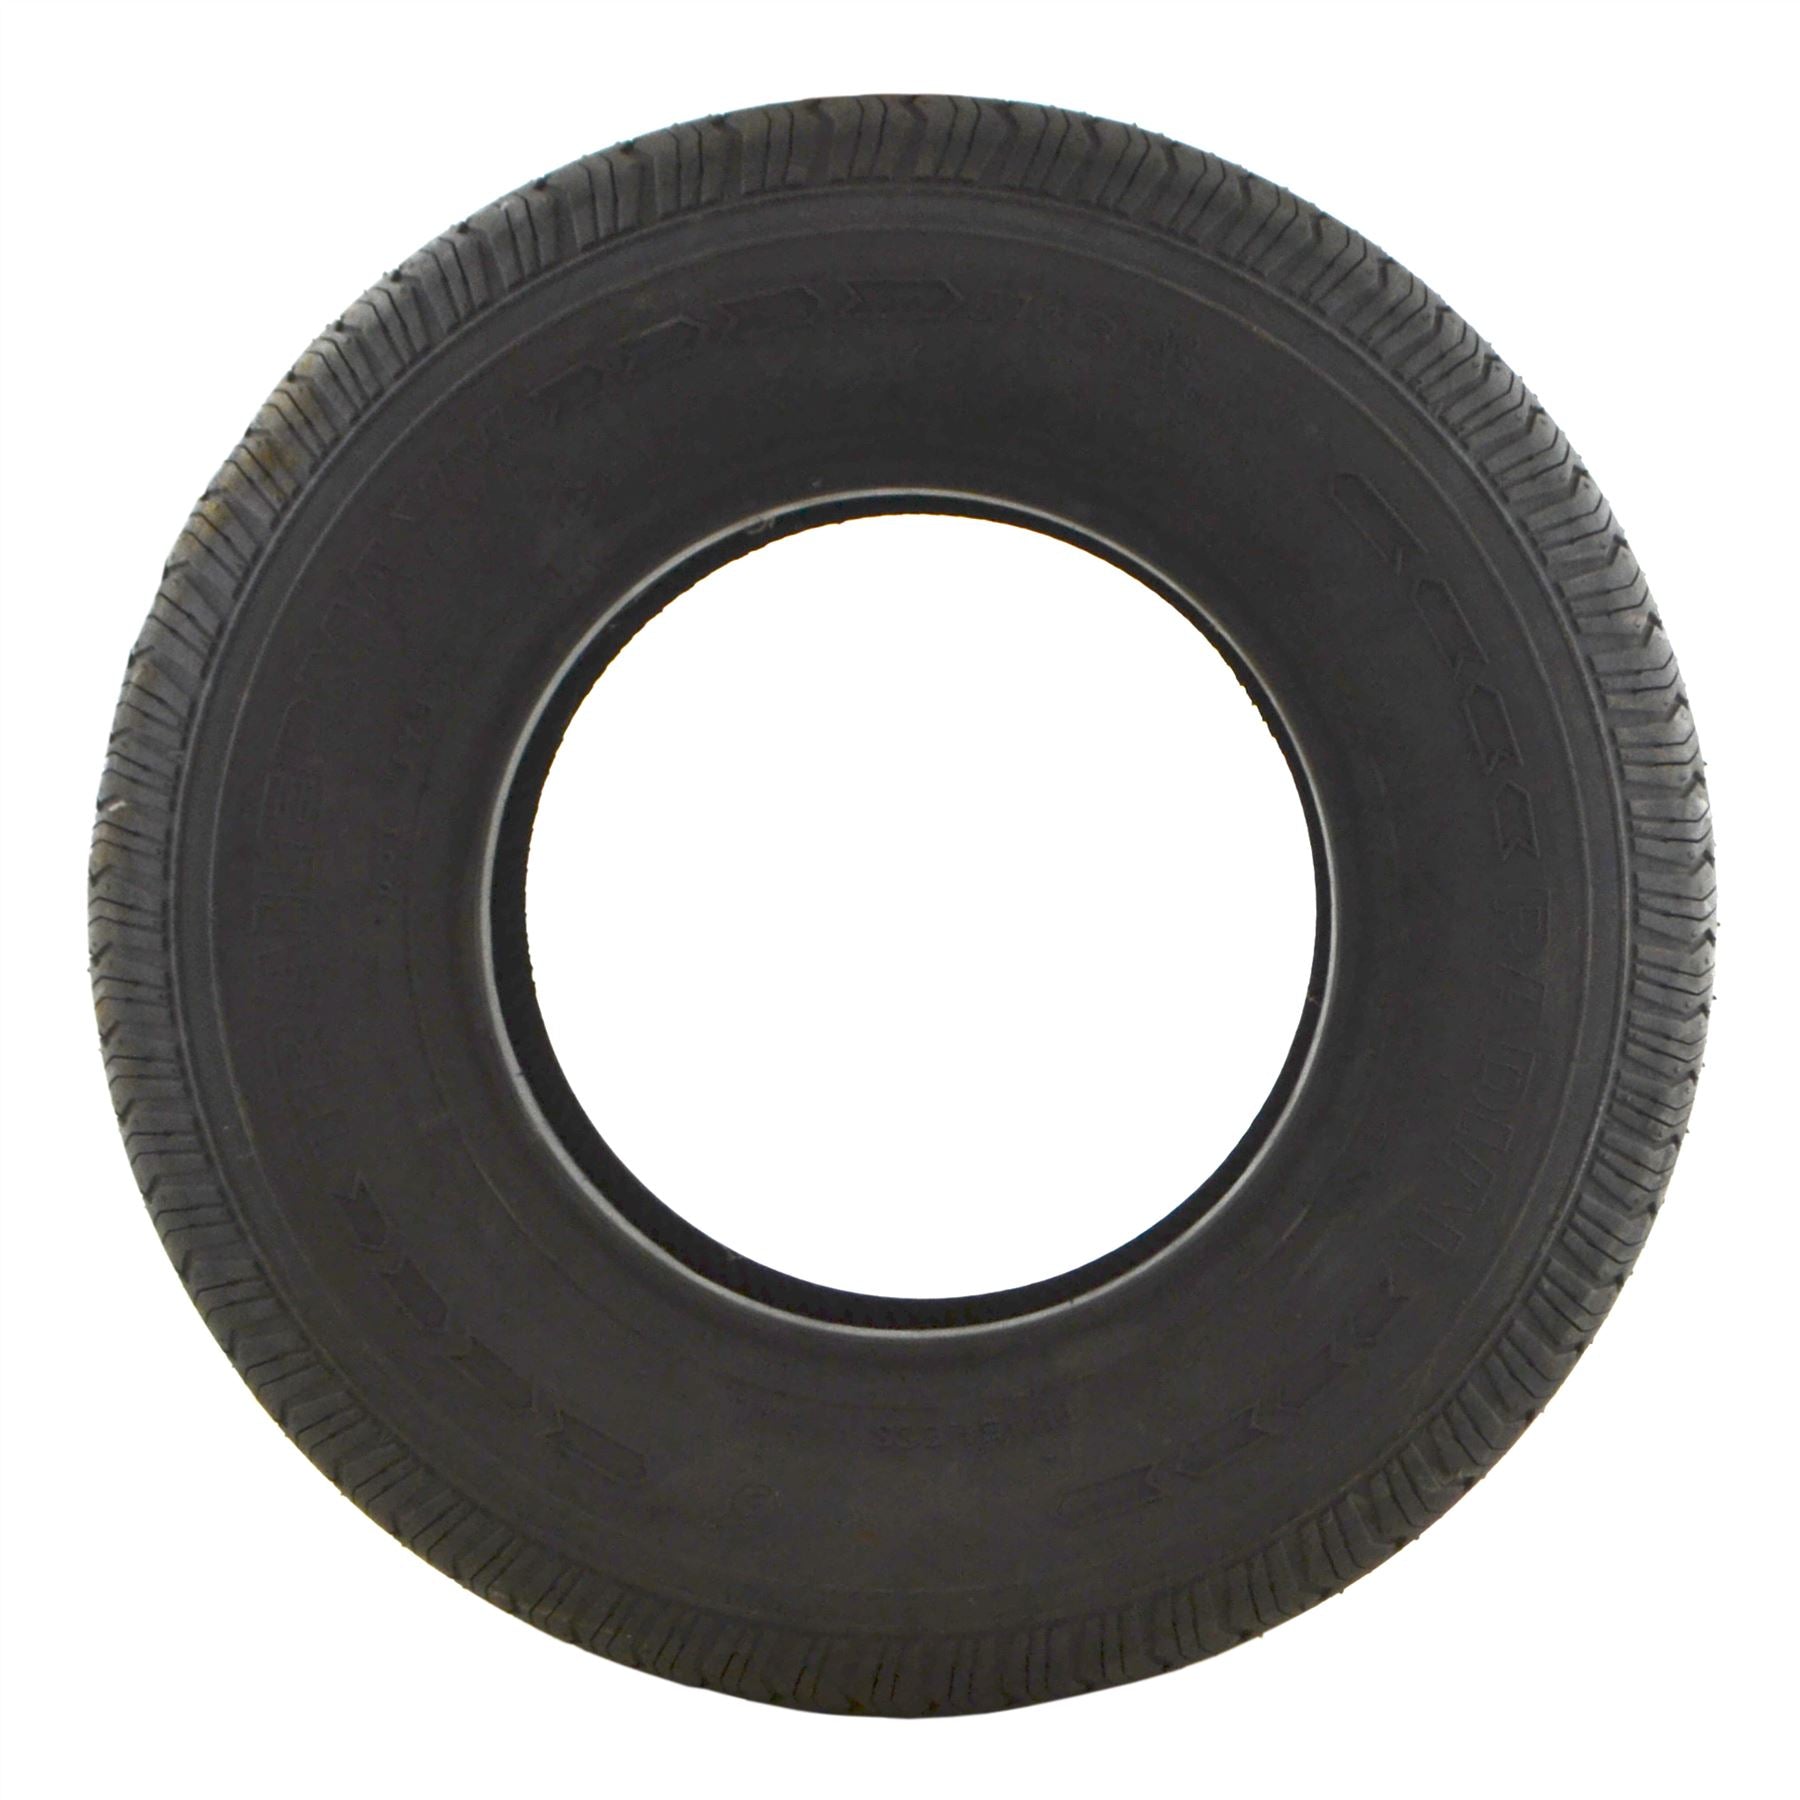 145 R10 Trailer Tyre Tire Only 74N Radial Tubeless 375kg Max 4 PLY TRSP35